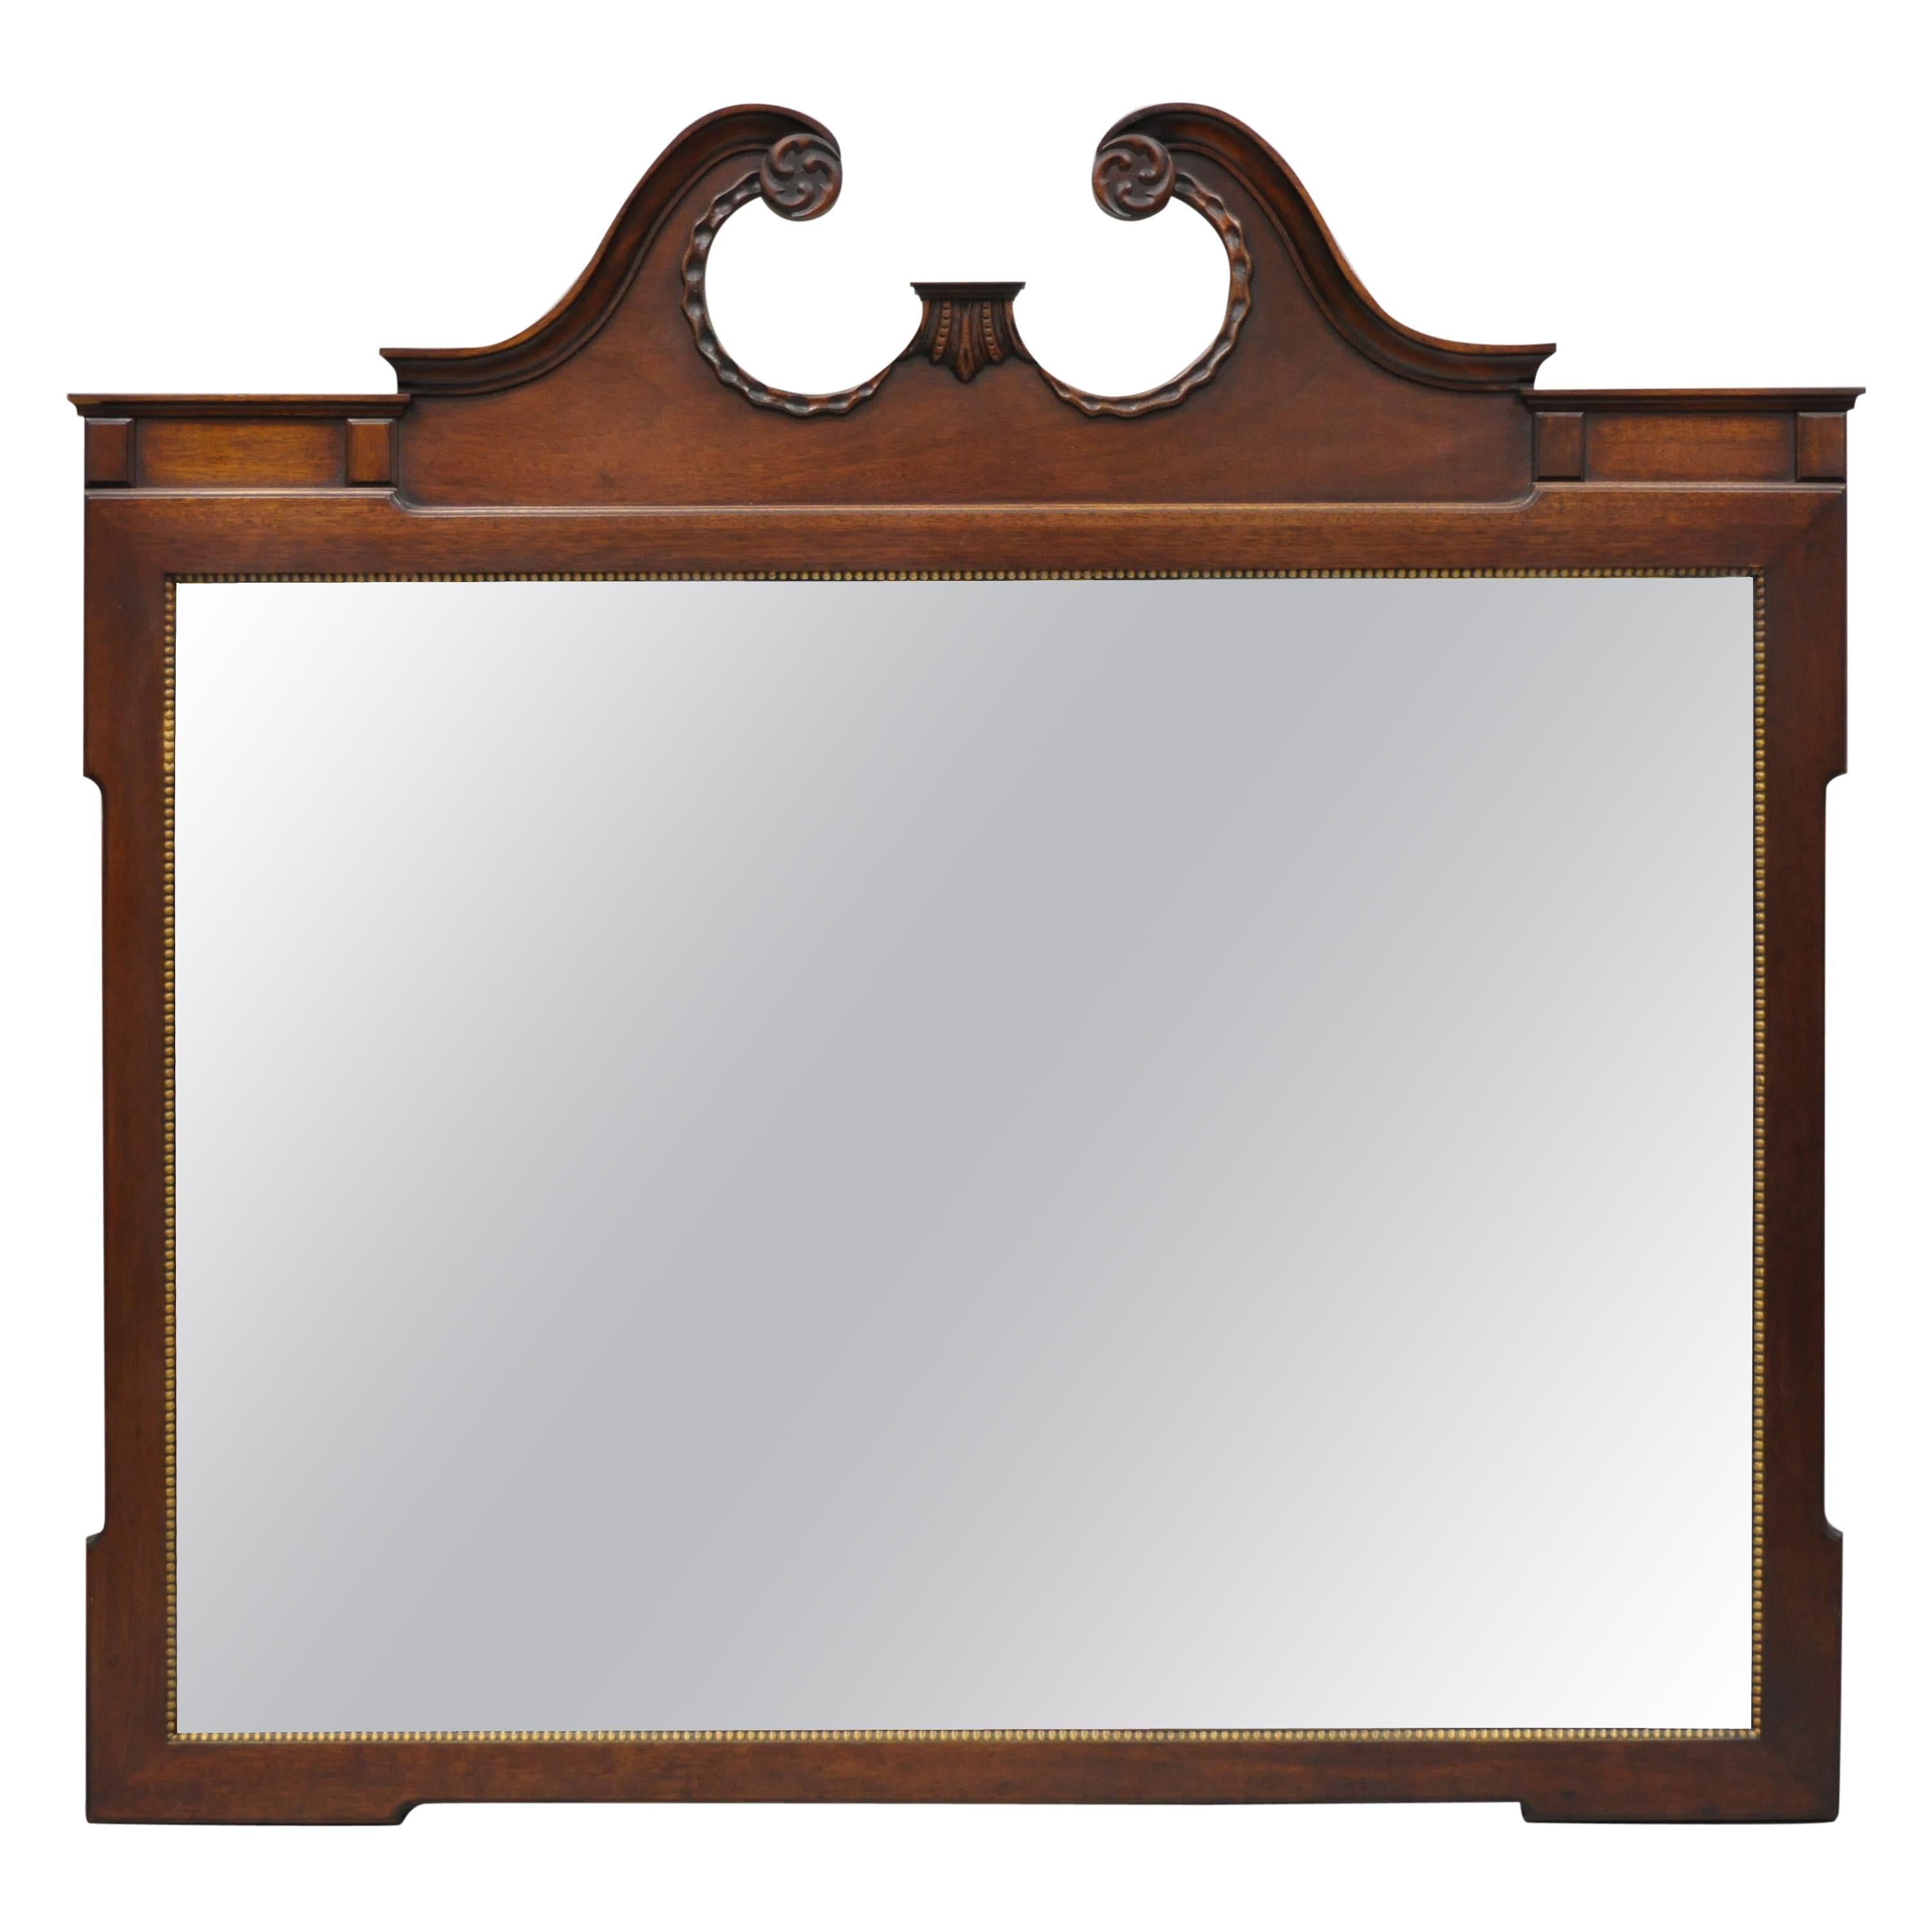 The Georgetown Galleries Mahogany Chippendale Broken Arch Dresser Wall Mirror